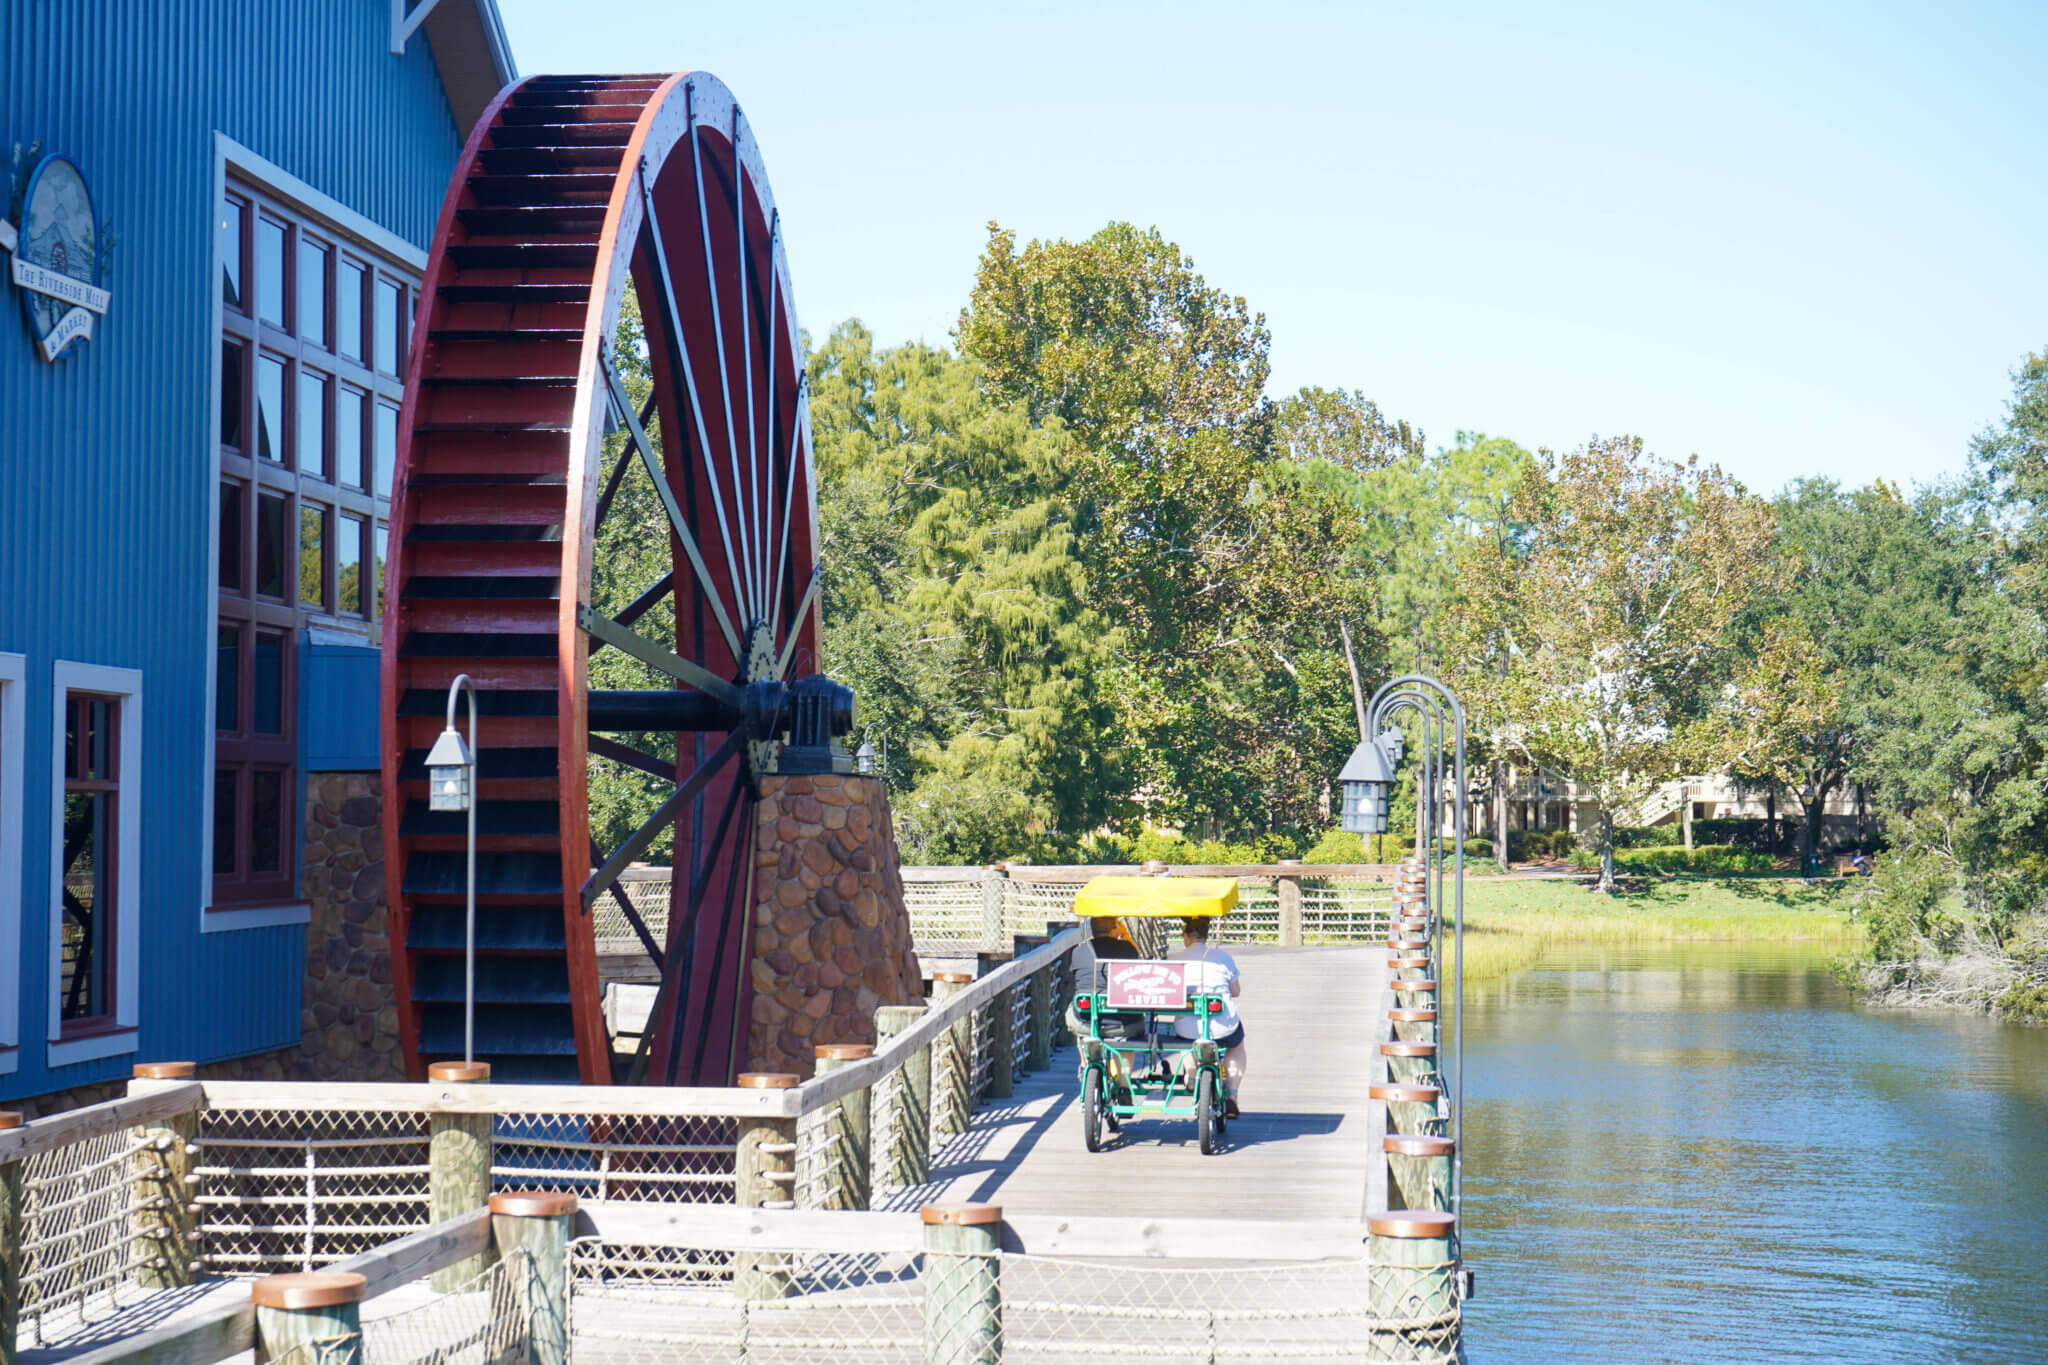 Port Orleans Riverside bridge and watermill wheel with a surrey bike